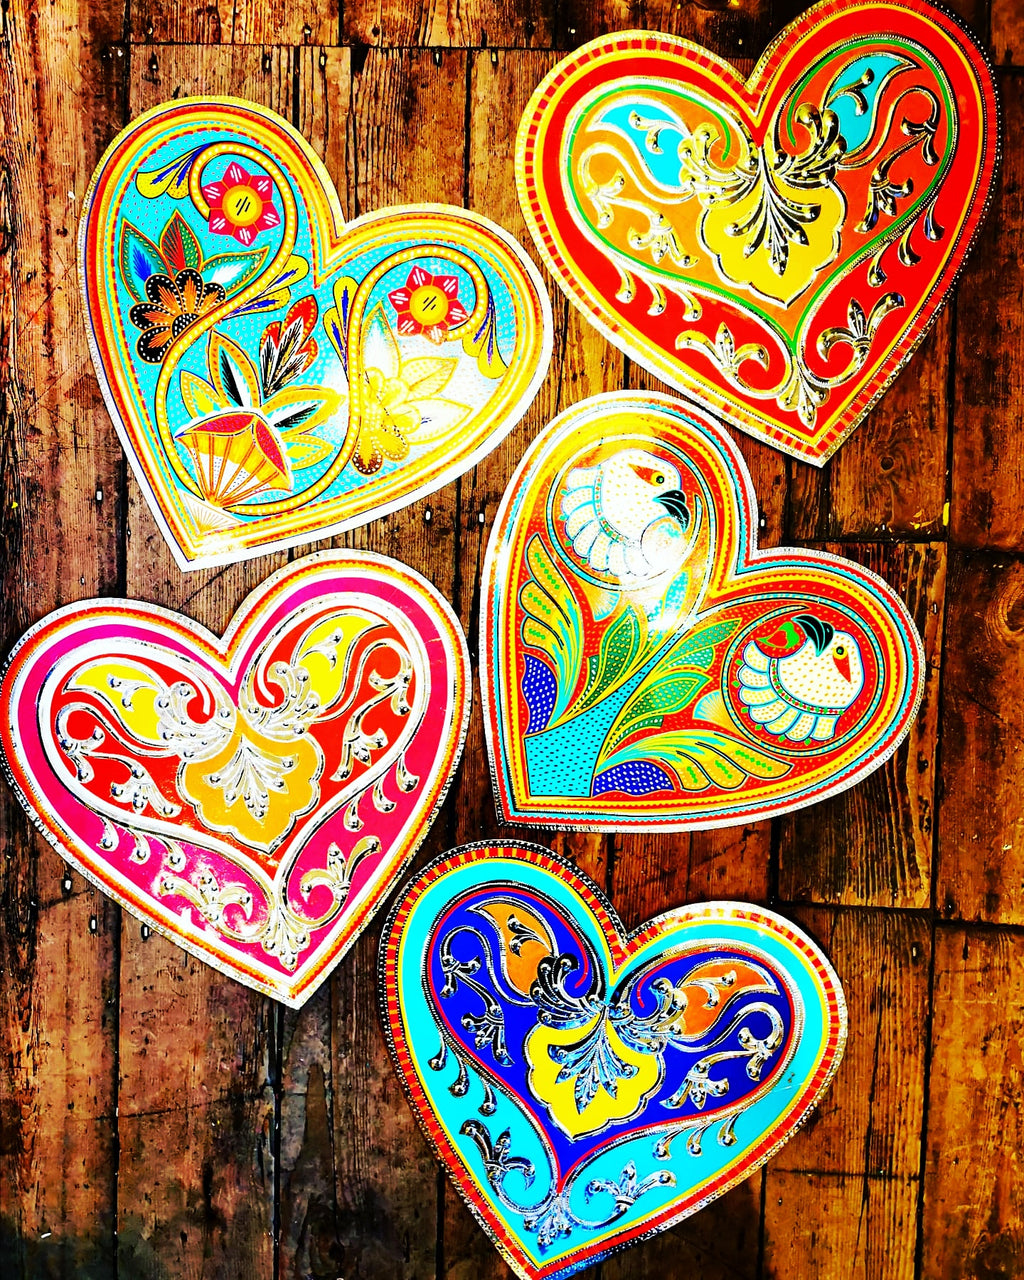 Hand made in Pakistan by the artisans that decorate the fabulously flamboyant trucks, these beautifully crafted metal plaques are decorated with hand cut reflective vinyl stickers. All so you can add a bit of folk art love to your home!

40cm x 38cm

